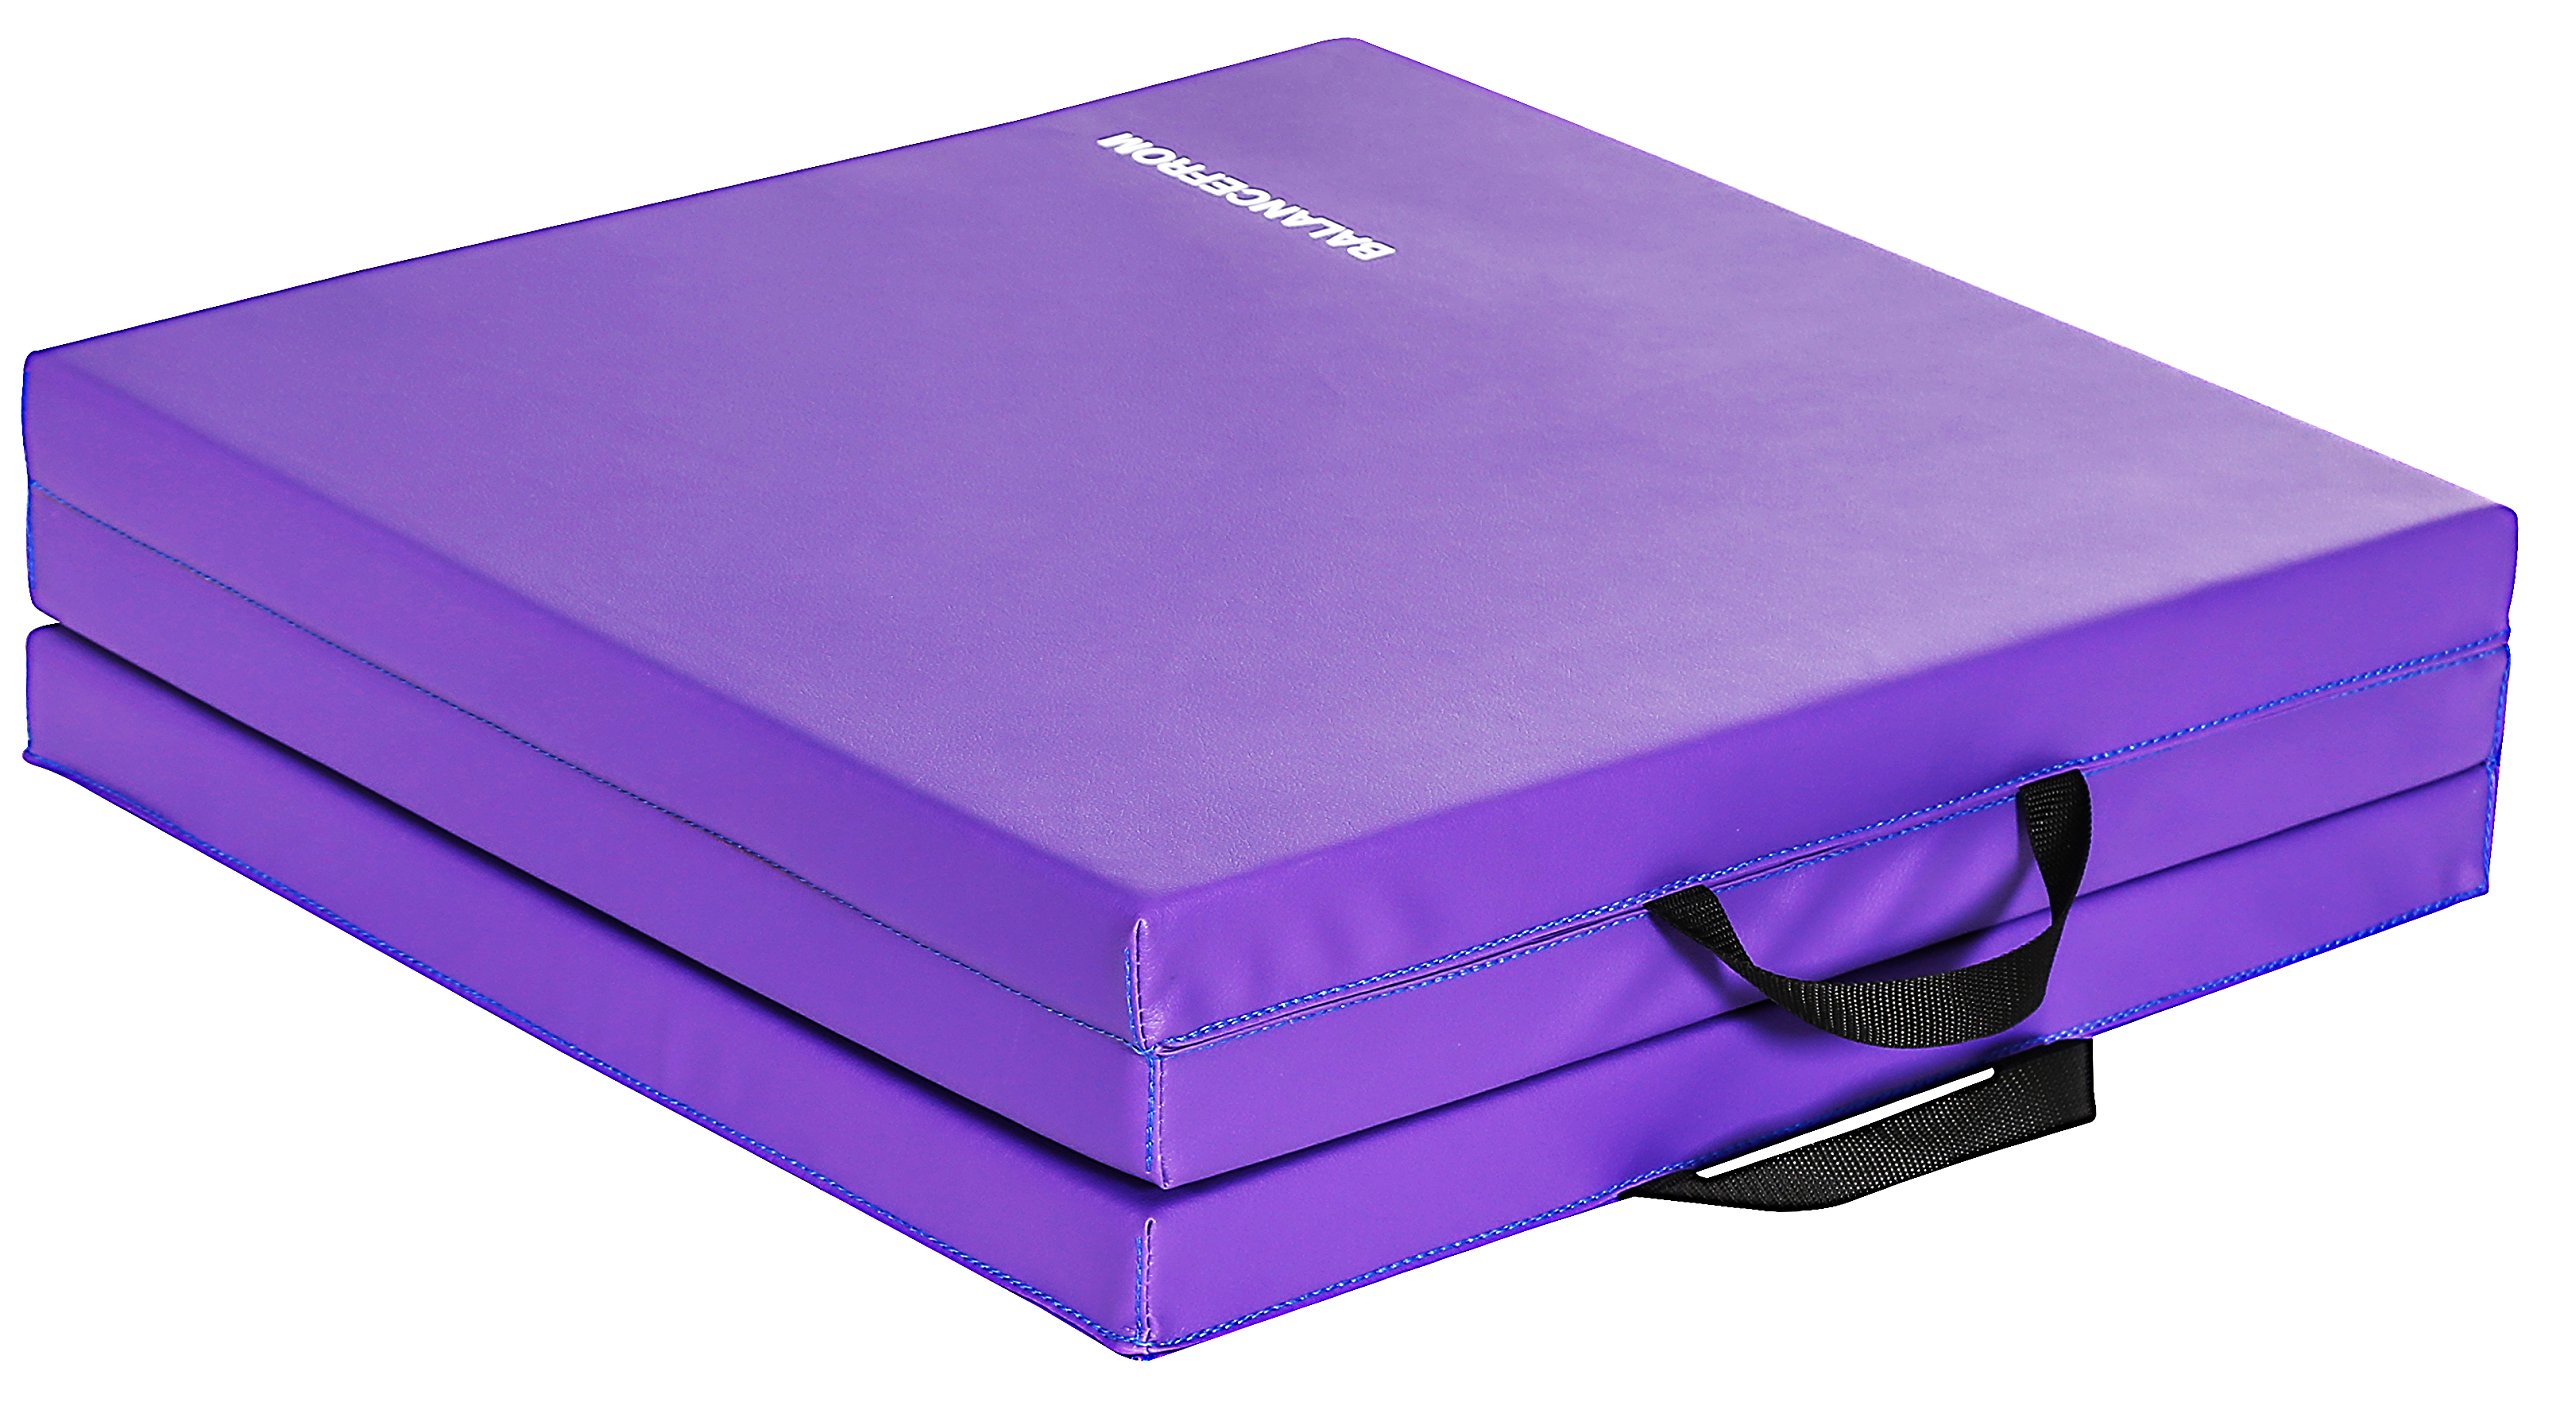 BalanceFrom Three Fold Folding Exercise Mat with Carrying Handles for MMA, Gymnastics and Home Gym Protective Flooring